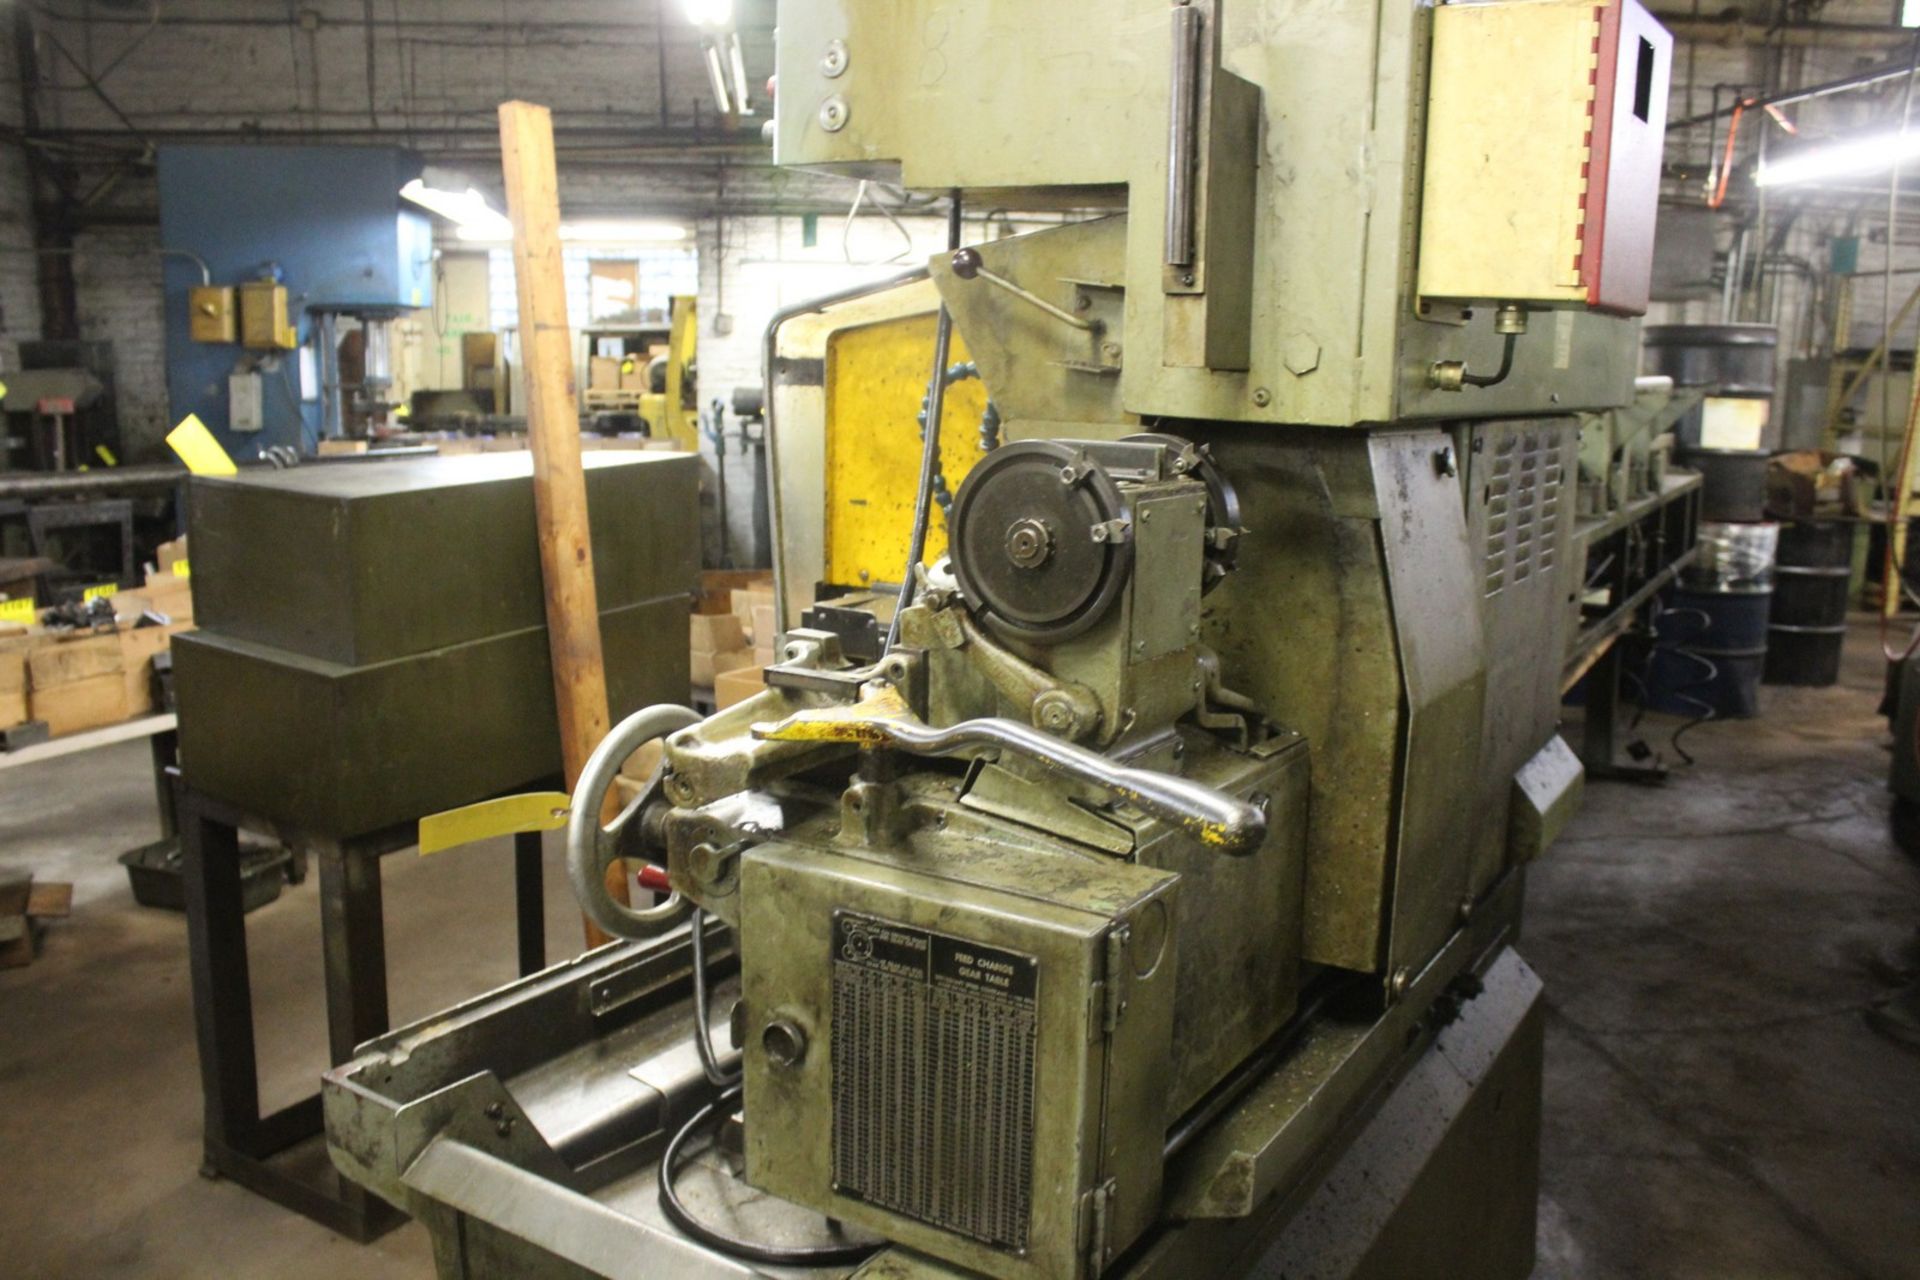 BROWN & SHARPE 1-5/8” AUTOMATIC SCREW MACHINE, S/N 542-2-8952, 8 HOLE TURRET, WITH 2 VERTICAL